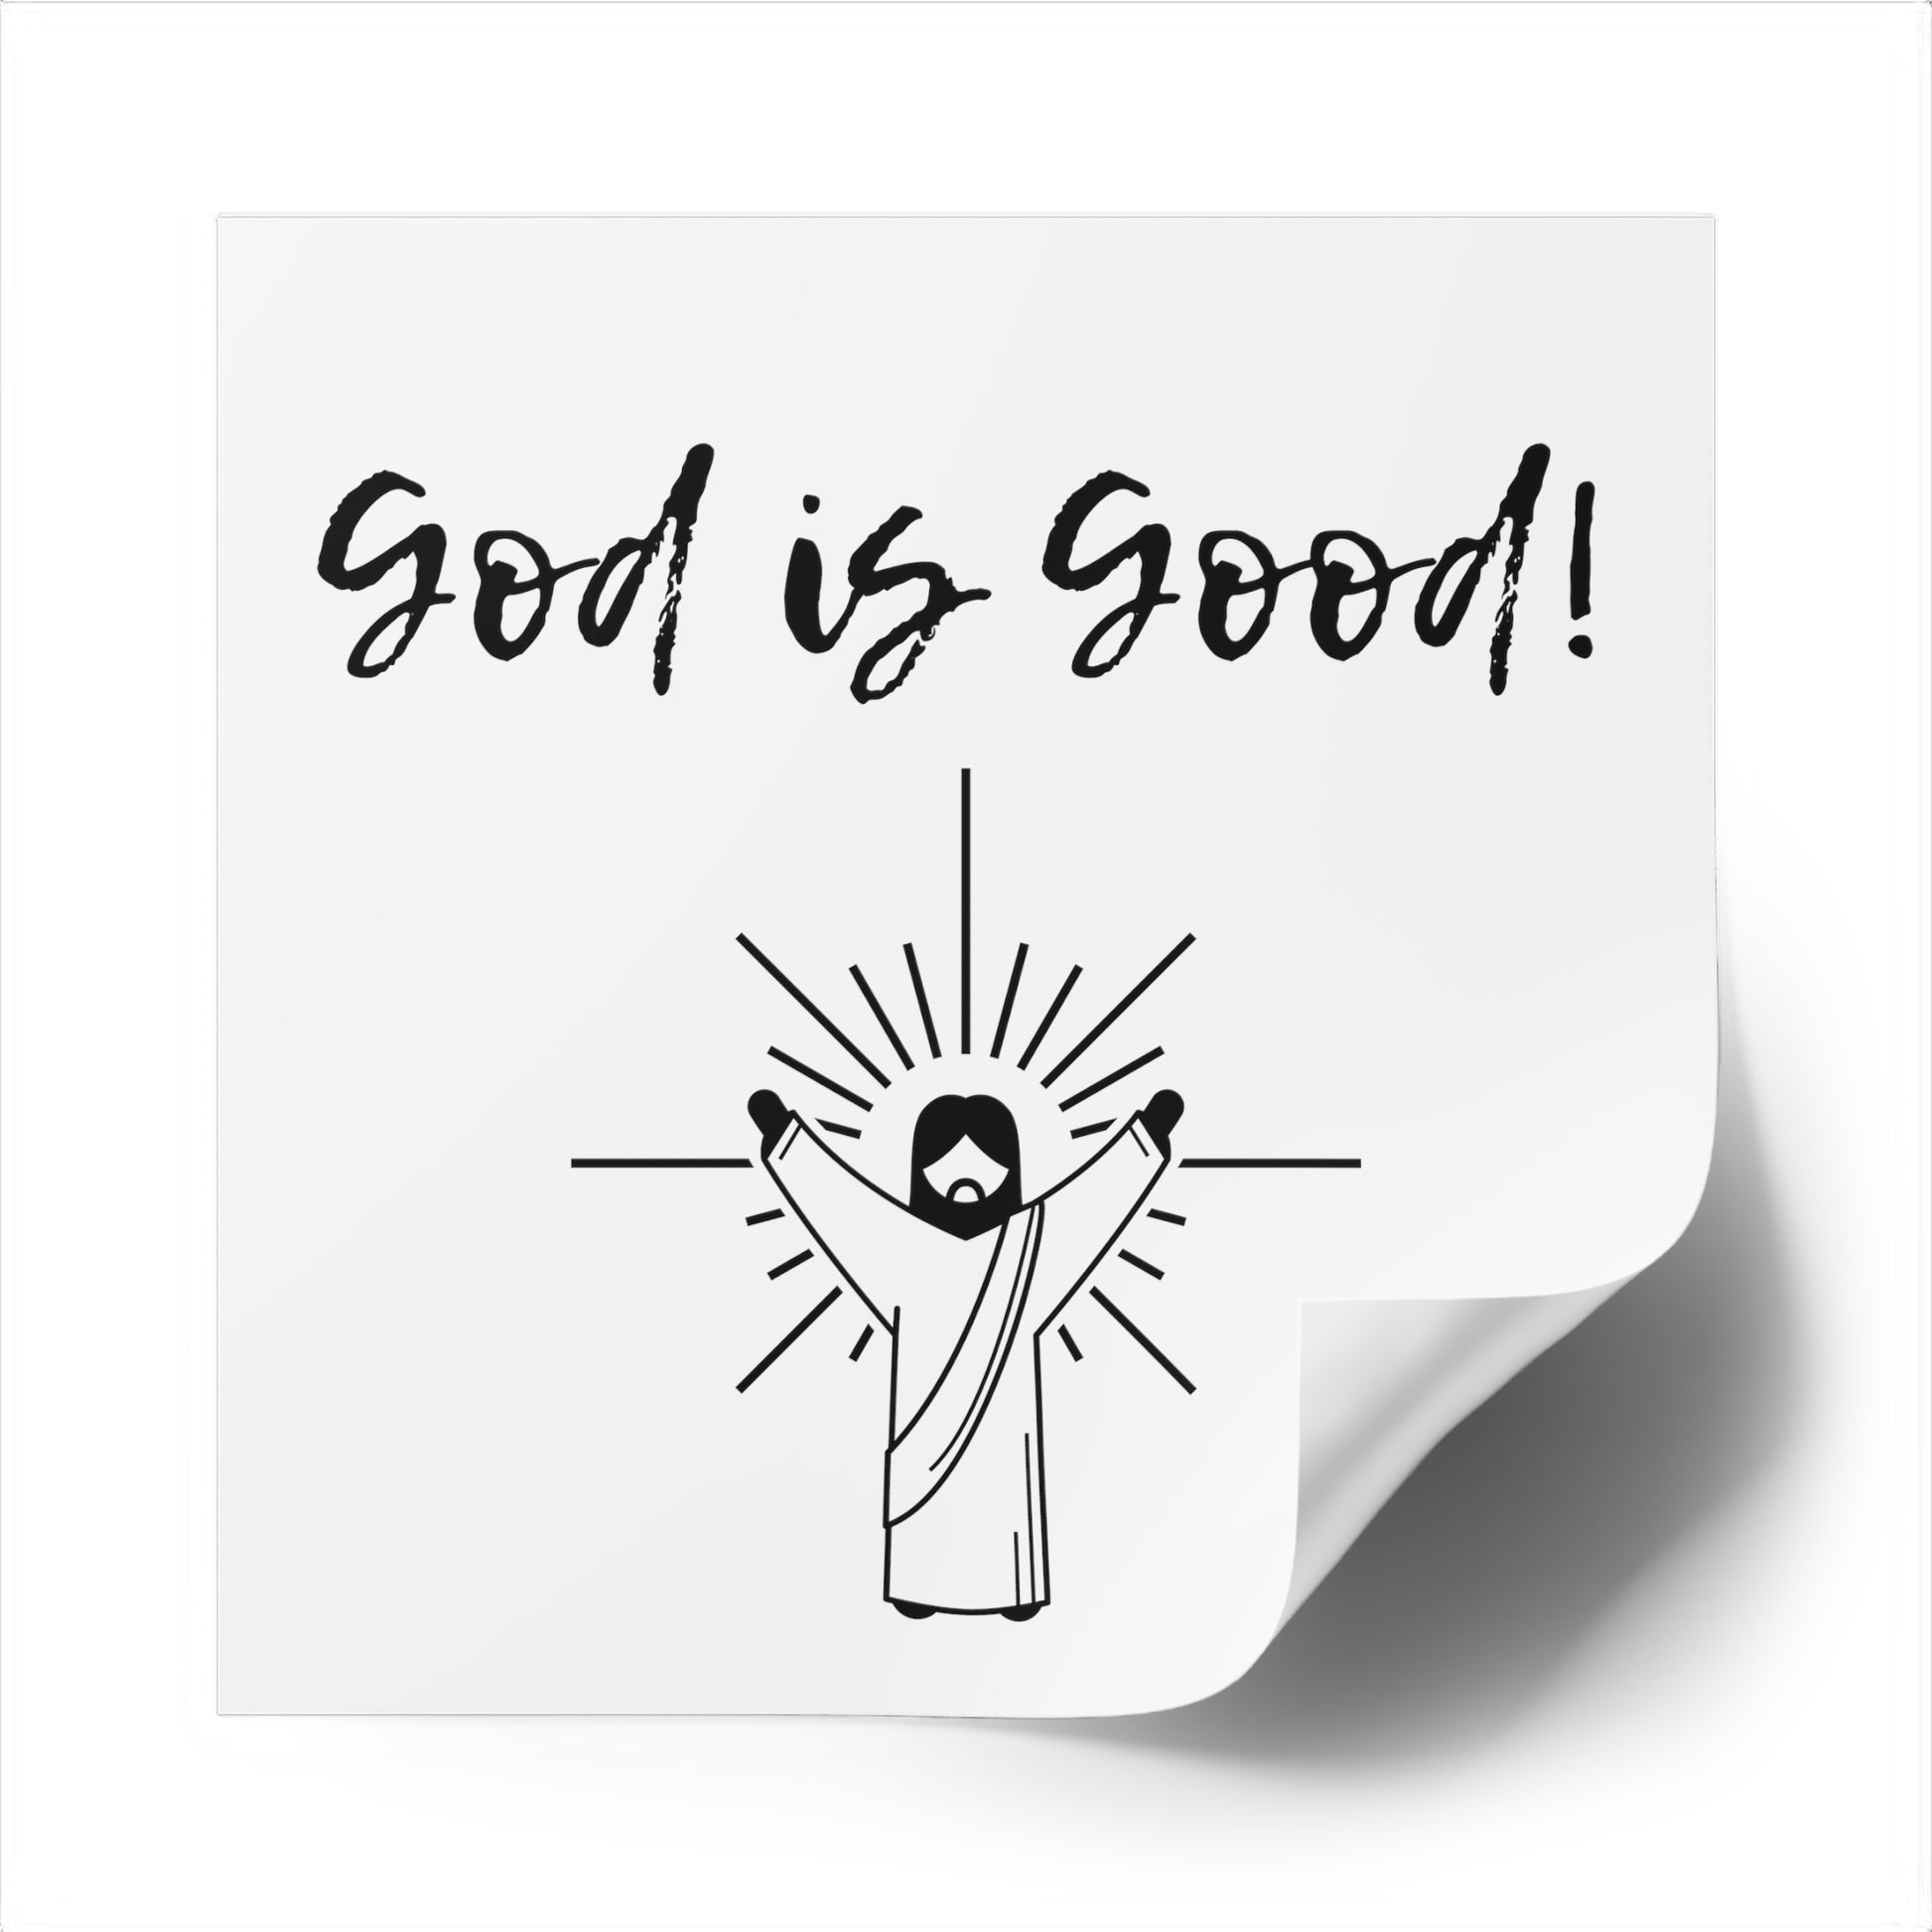 God Is Good Sticker, Christian Sticker,  Laptop, Phone, Notebook Sticker, Faith Sticker, Gift for Christian, Bible Verse, Religious Stickers - The Good Life Vibe